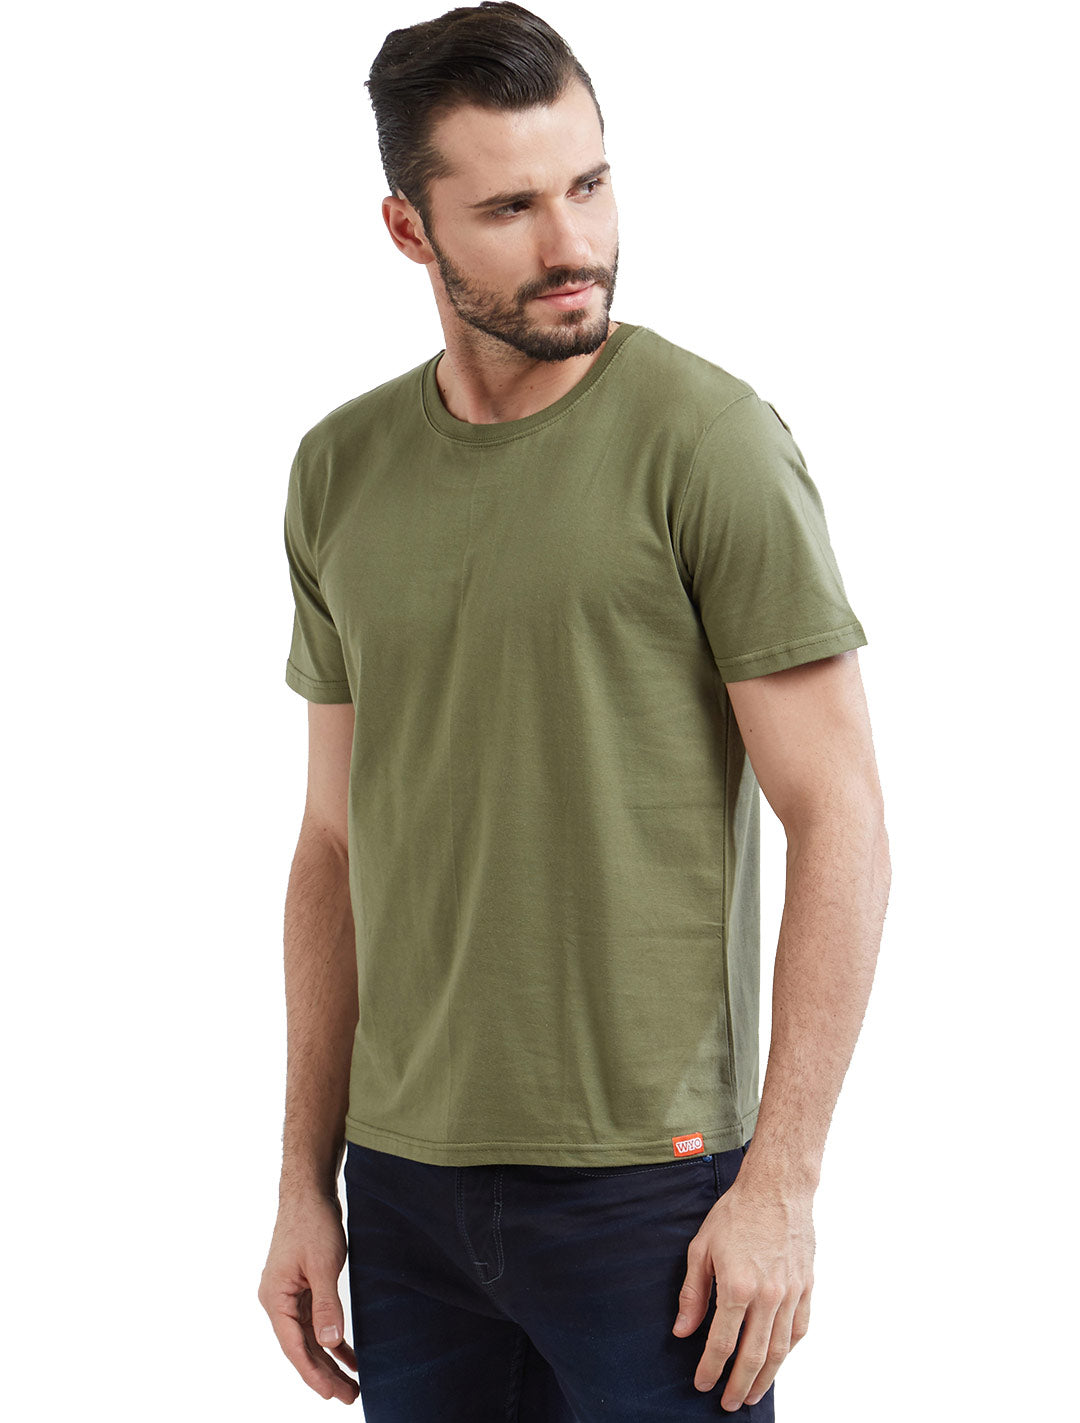 Solid Mens Army T Shirts | Indian Army Plain Khaki Color Tees | WYO ...